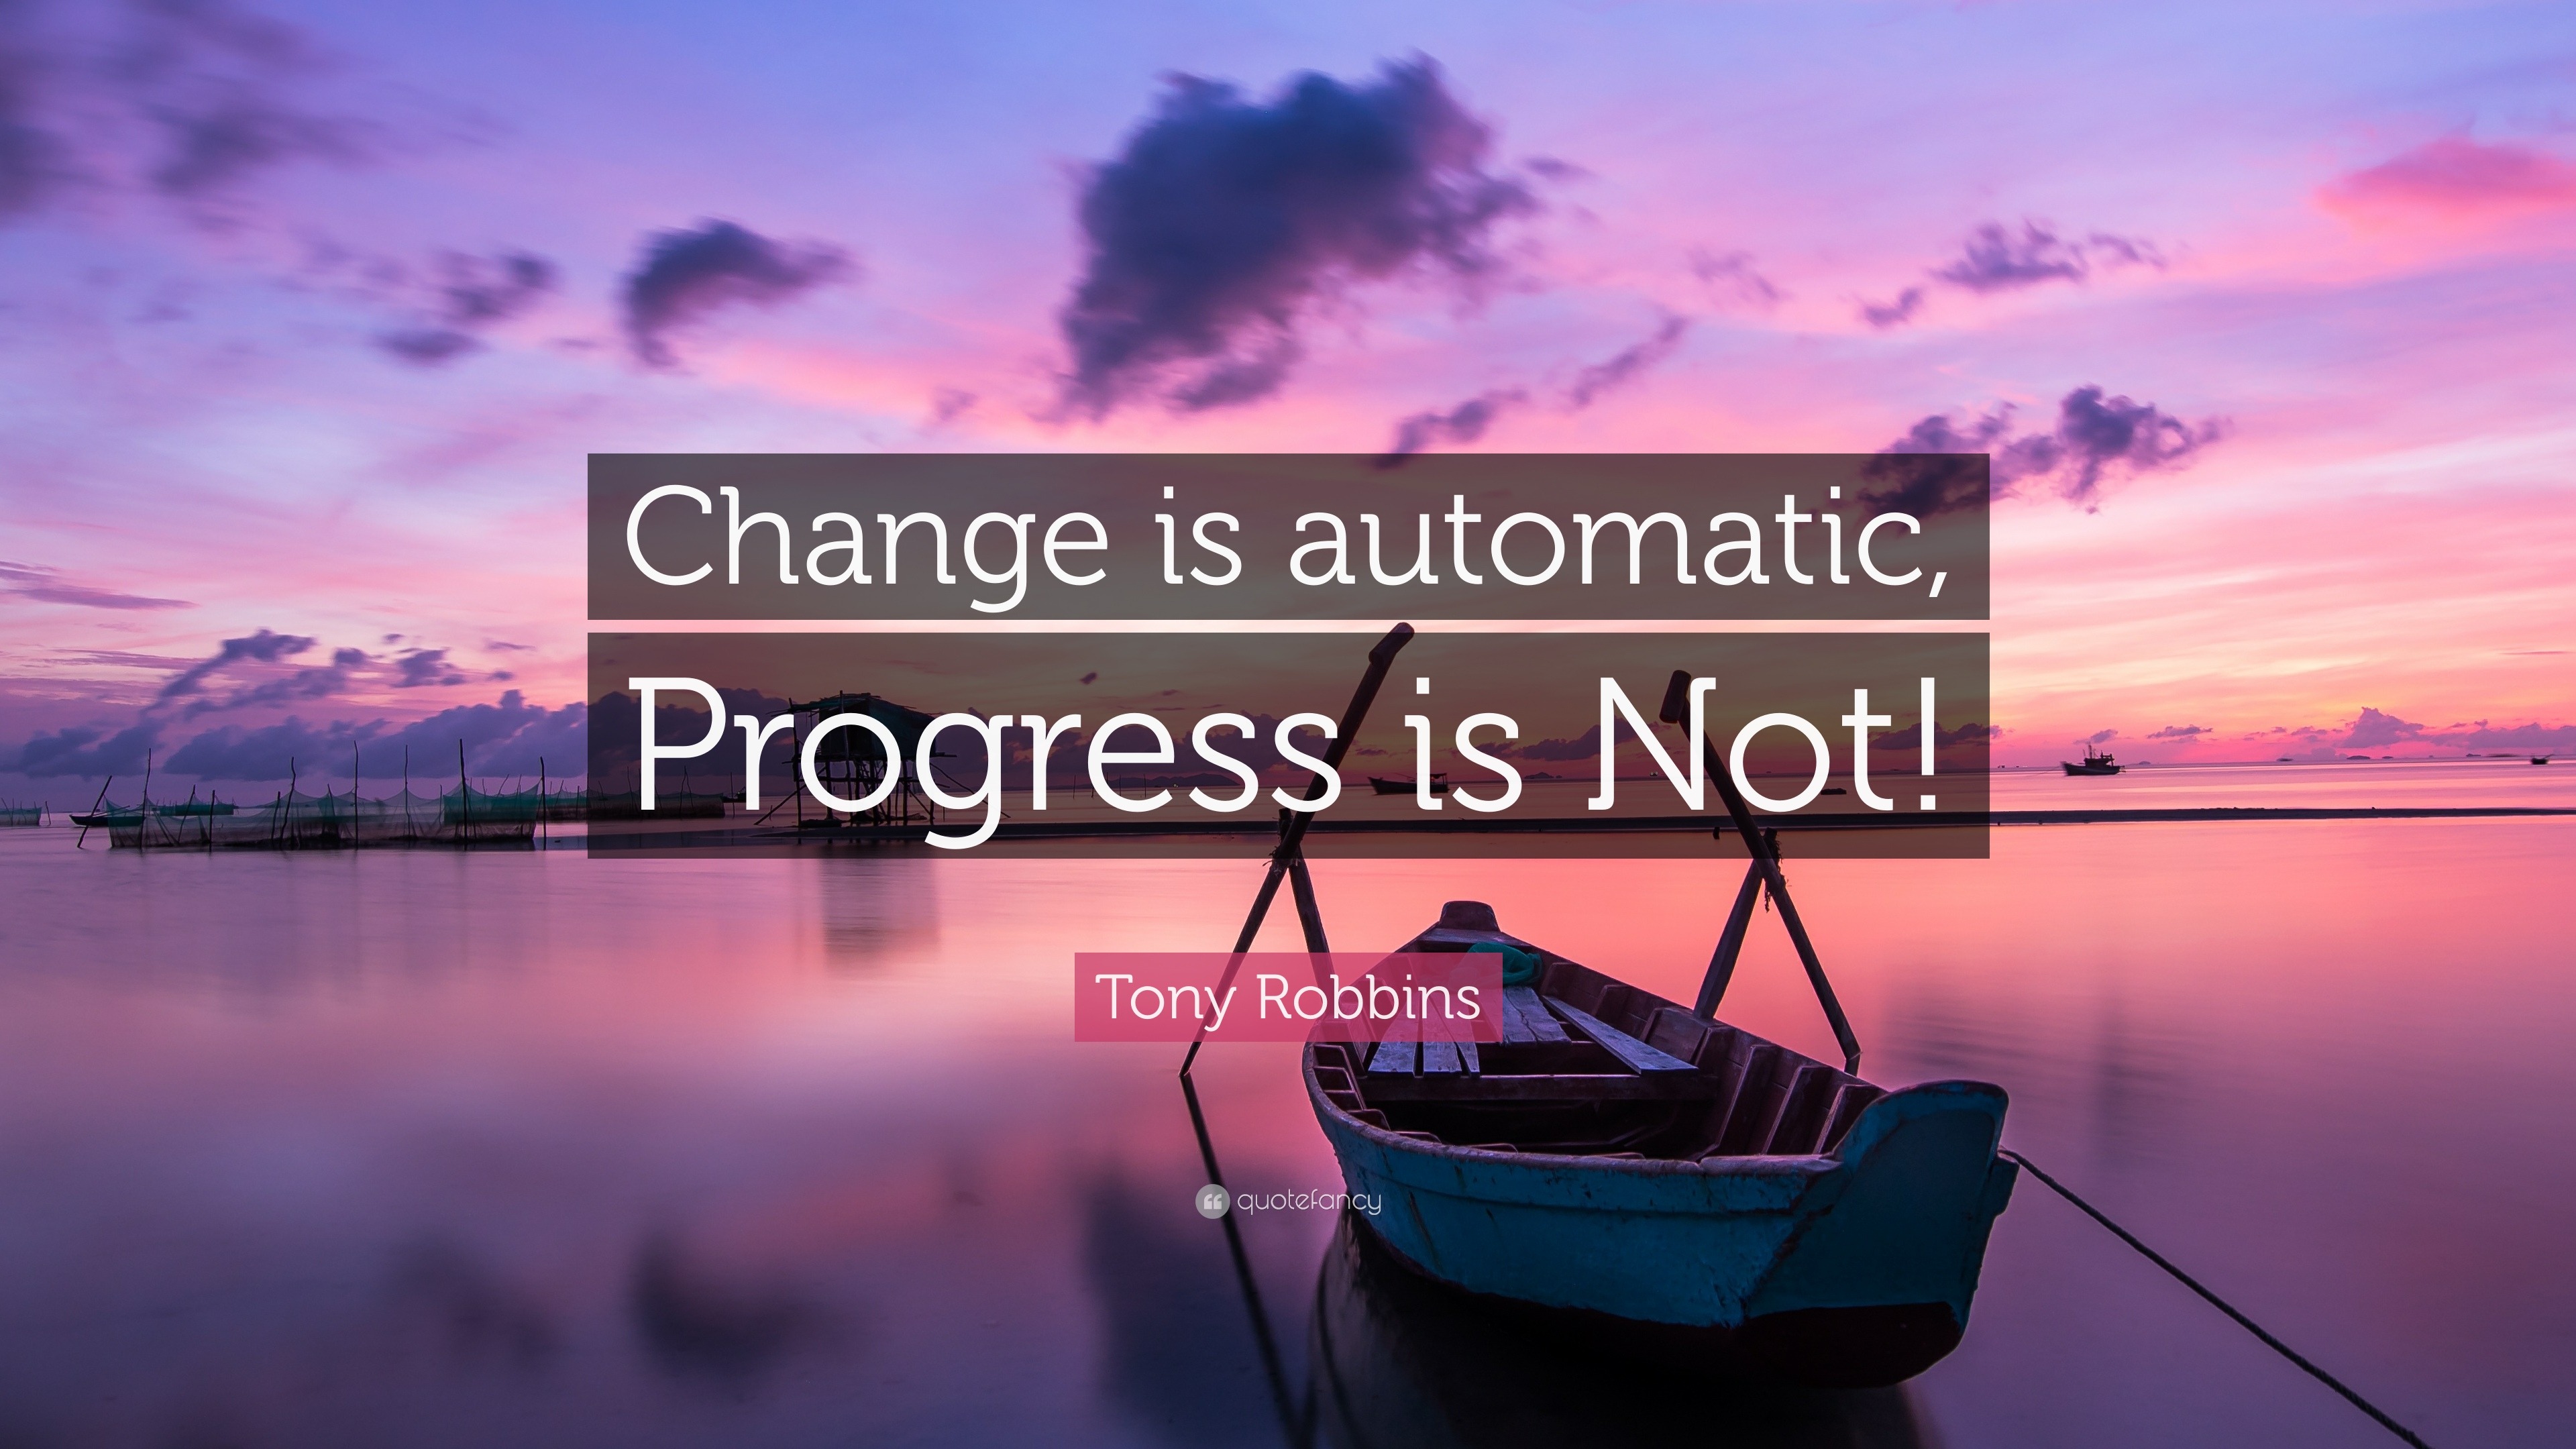 Tony Robbins Quote “Change is automatic, Progress is Not